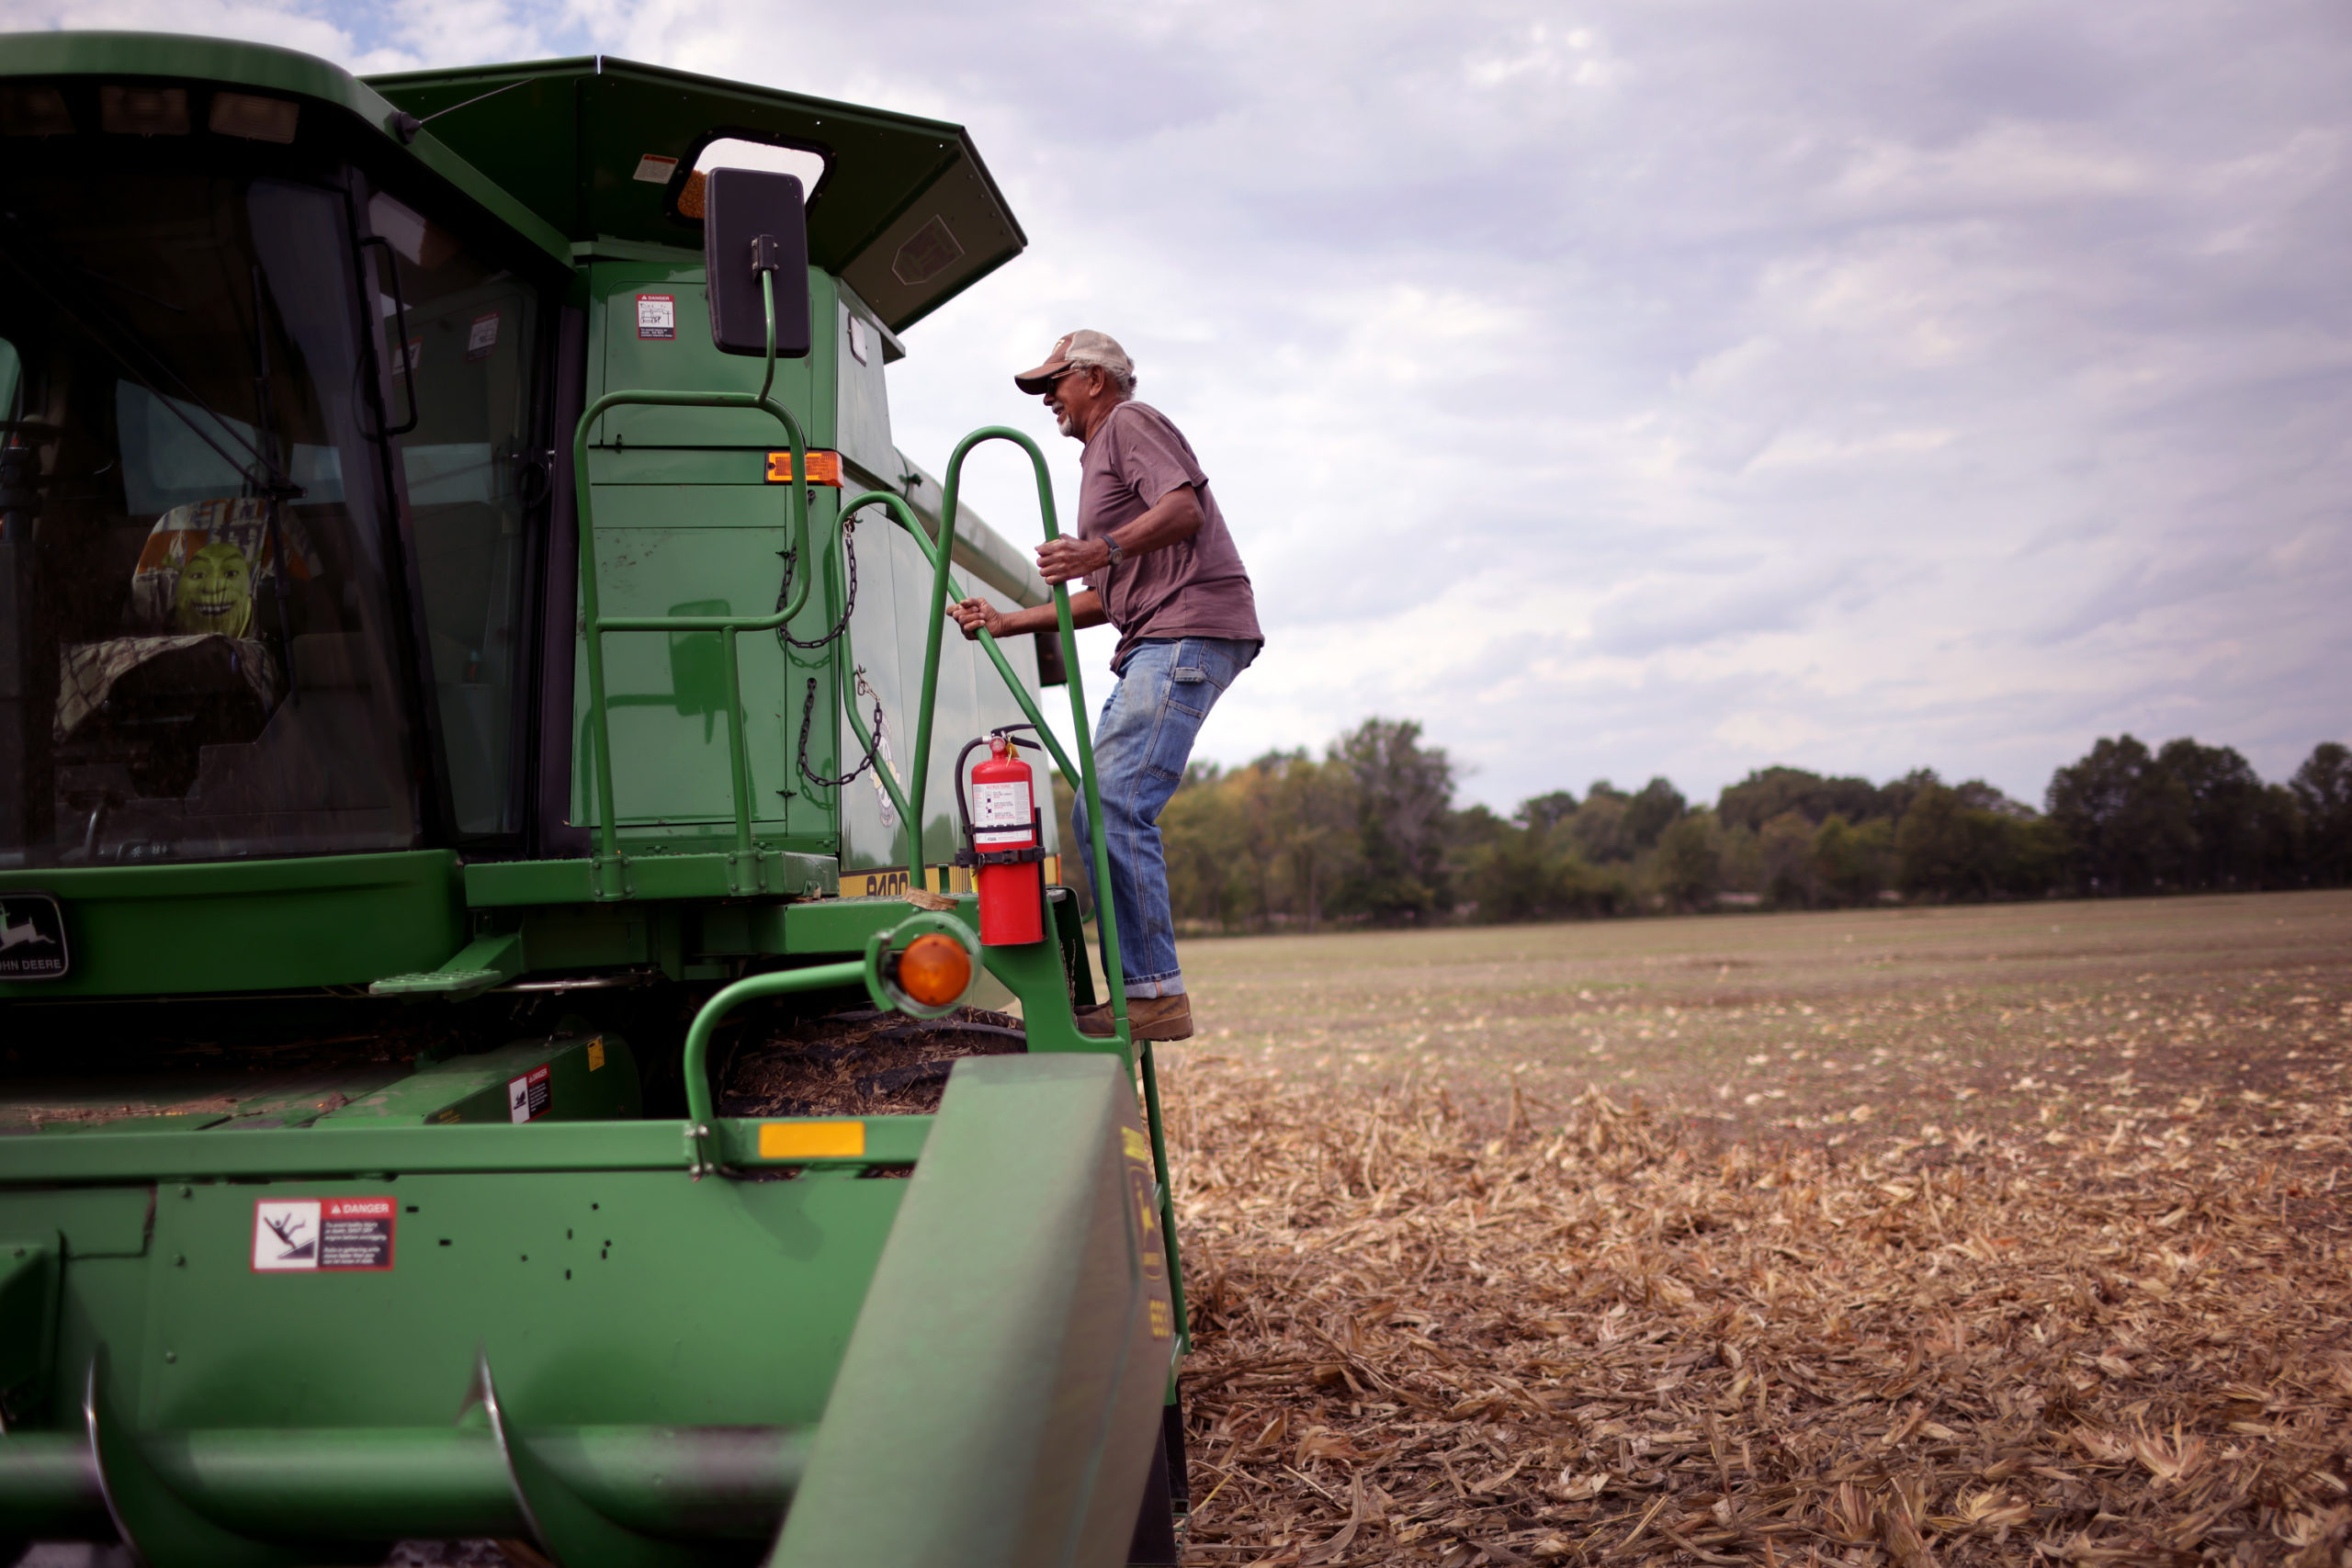 A farmer harvests corn on Oct. 11 in Princeton, Indiana. (Scott Olson/Getty Images)